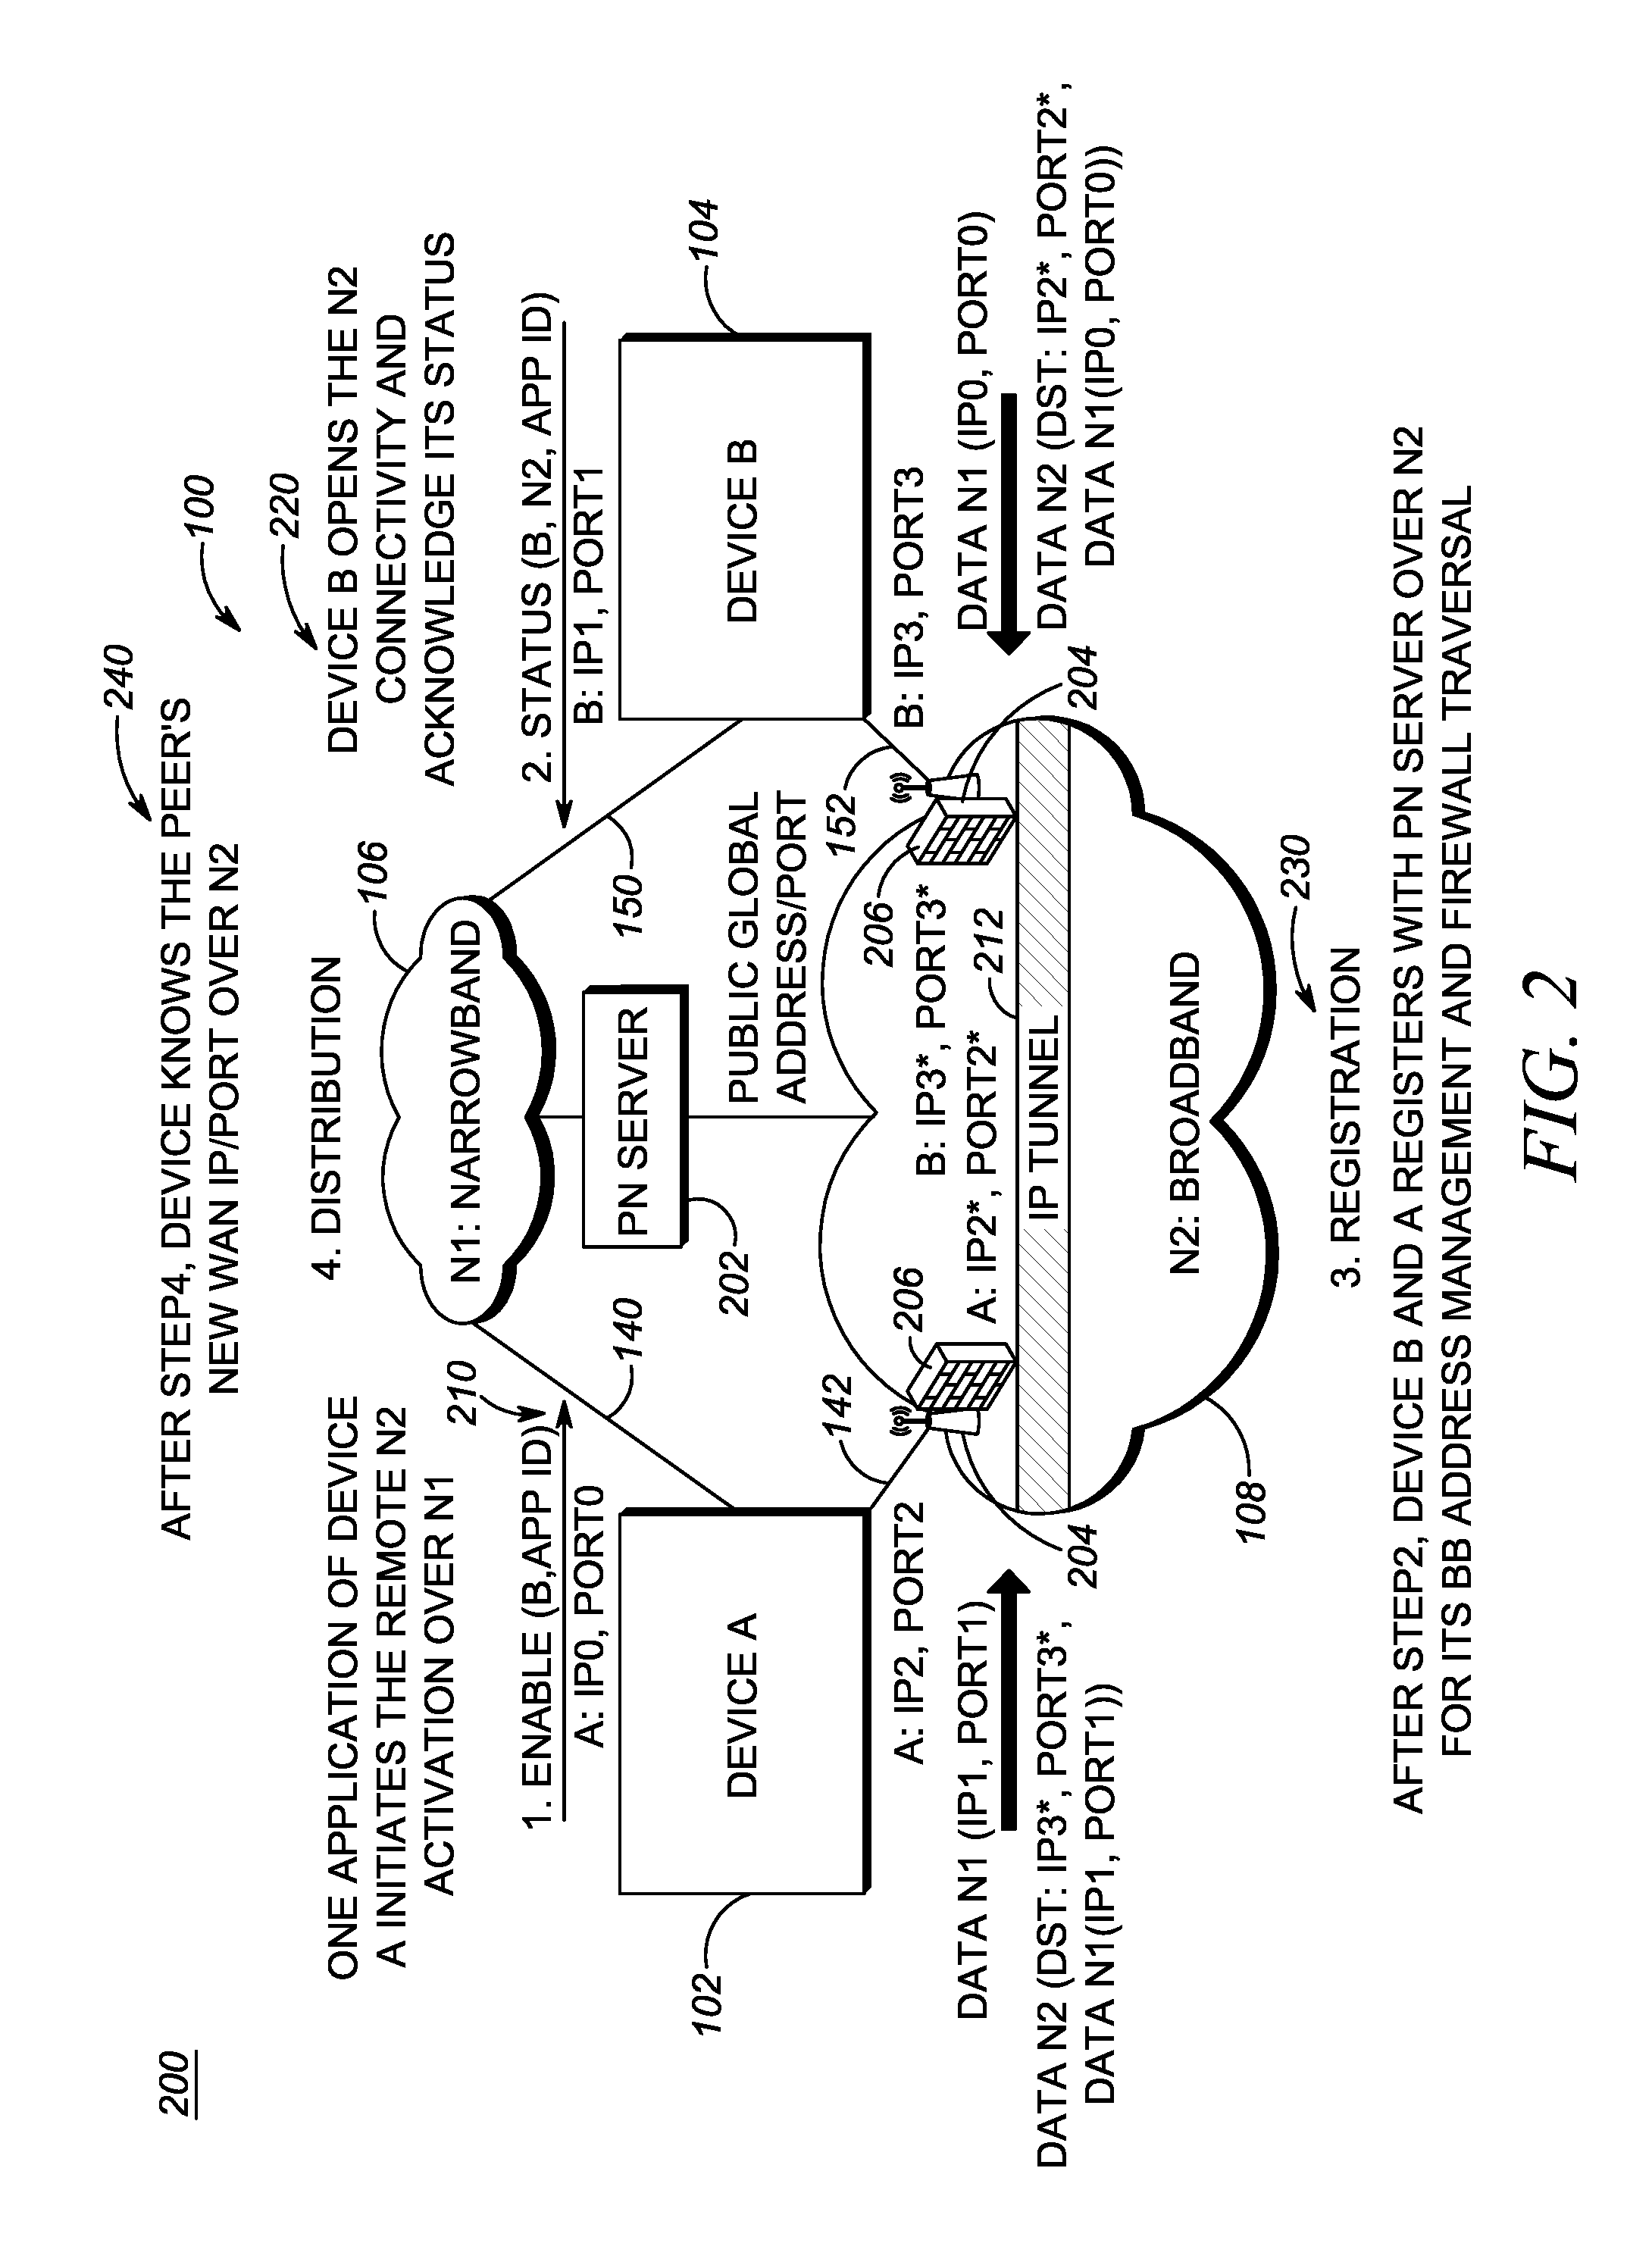 Systems and methods for application controlled network selection between narrowband and broadband wireless networks